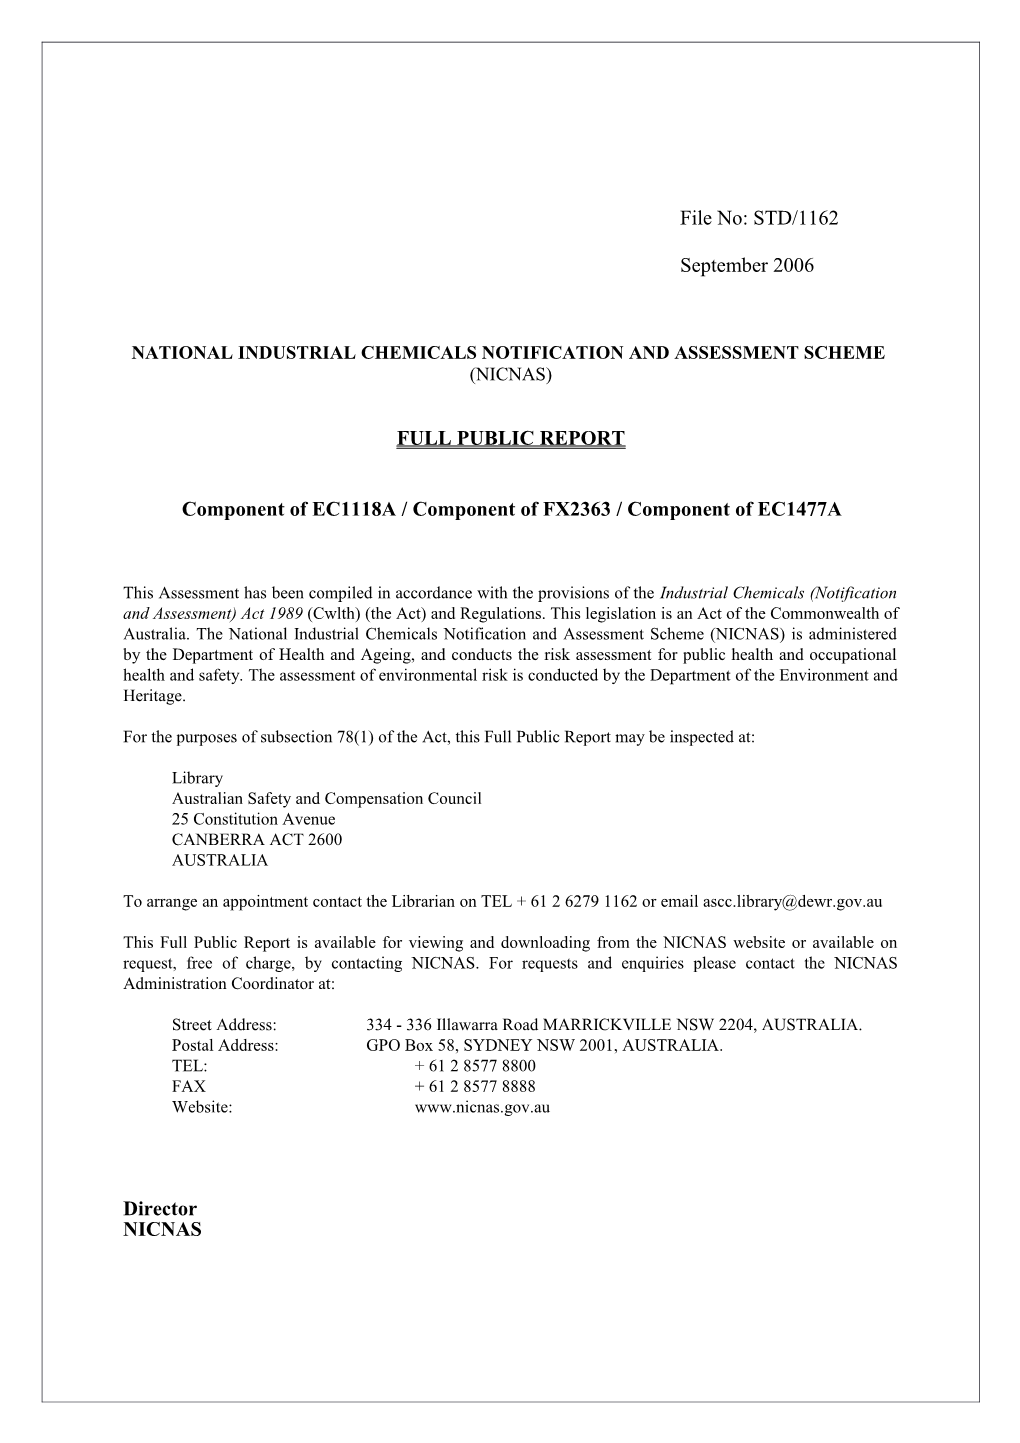 National Industrial Chemicals Notification and Assessment Scheme s23